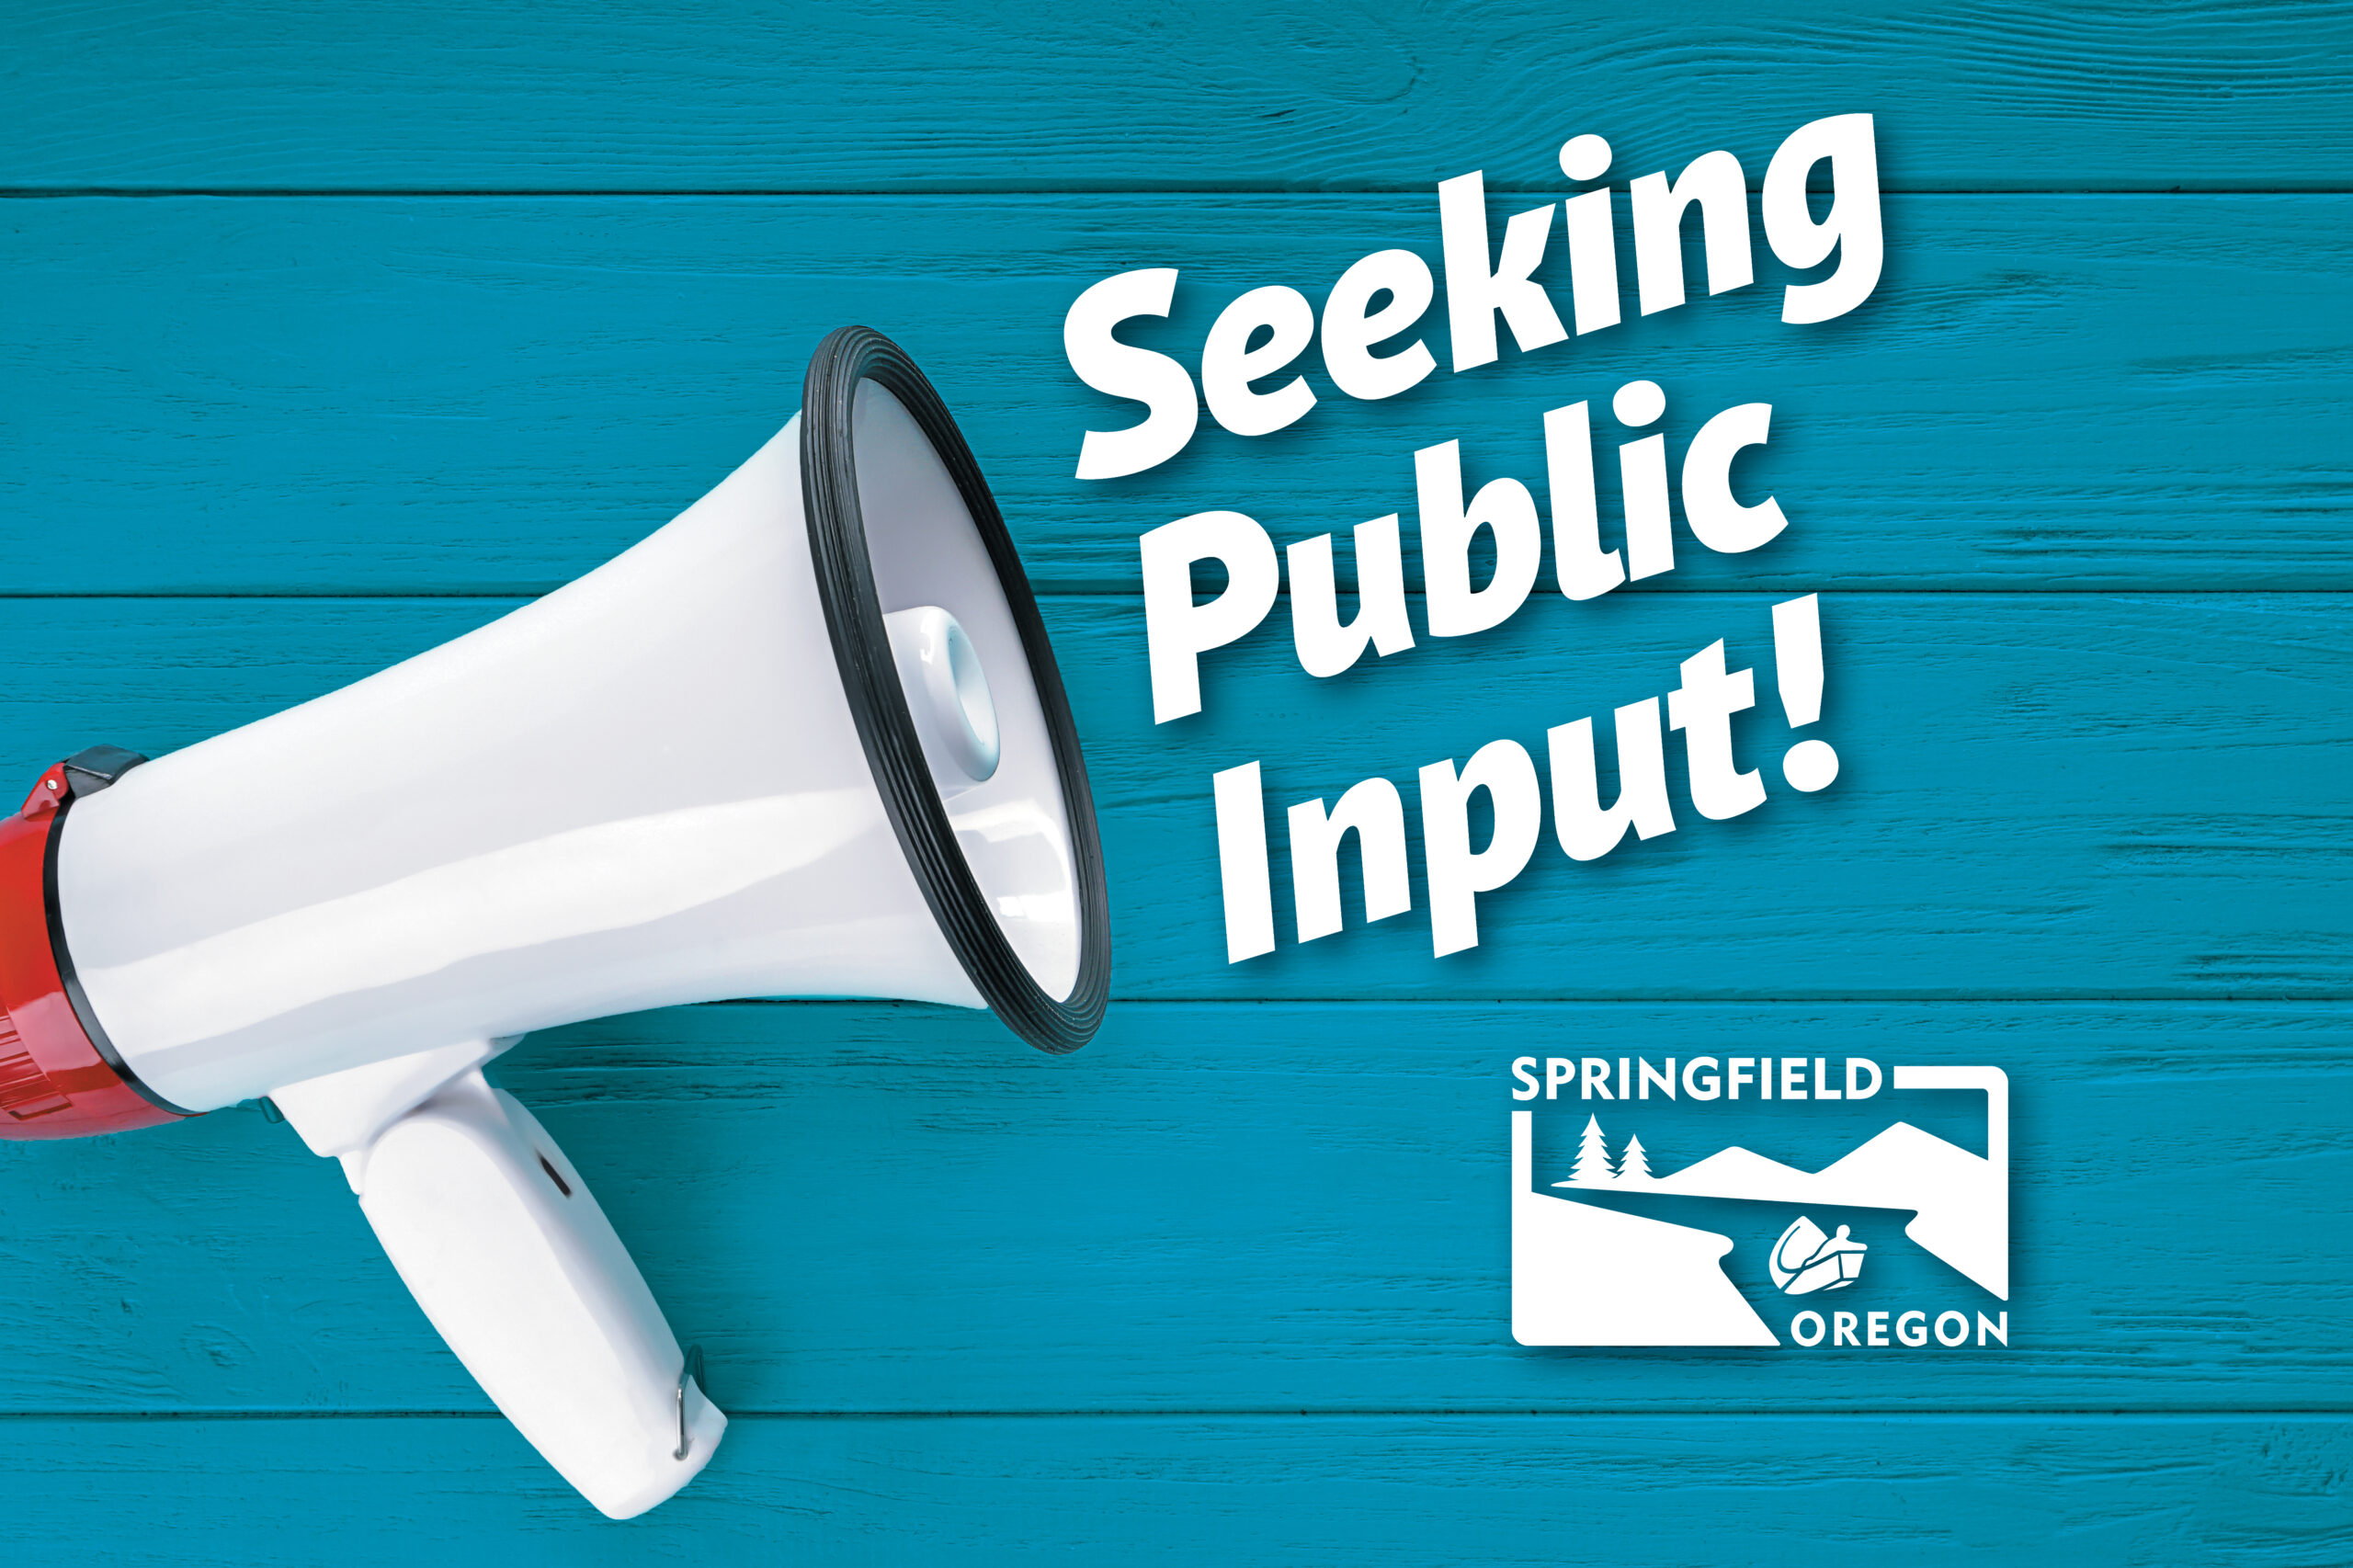 Seeking Public Input with megaphone and Springfield City logo with mountains and river with driftboat.